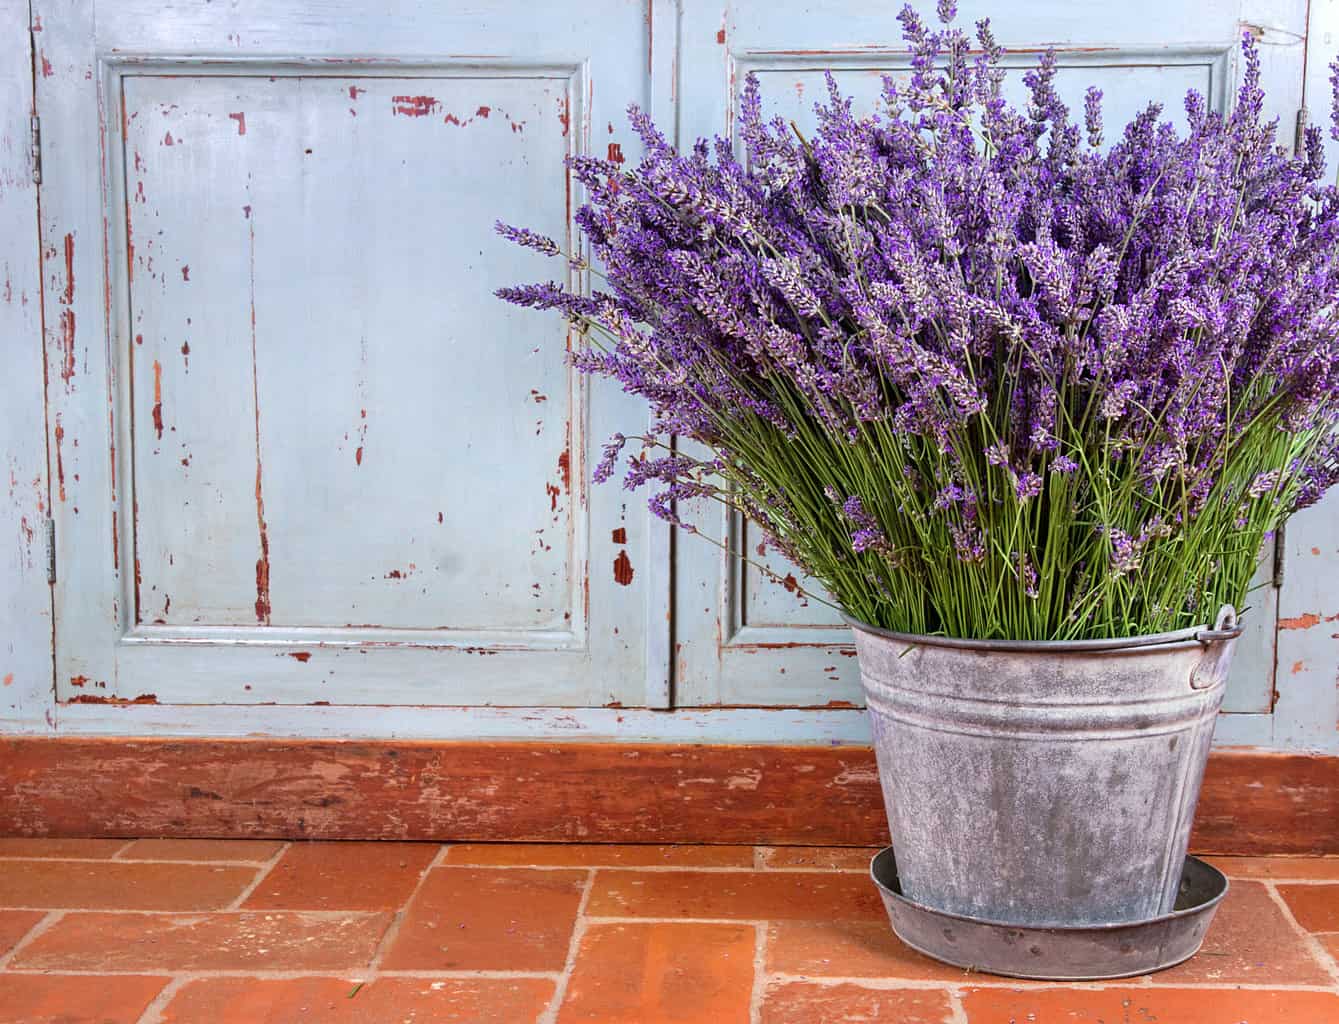 fresh lavender growing in a pot in a rustic setting